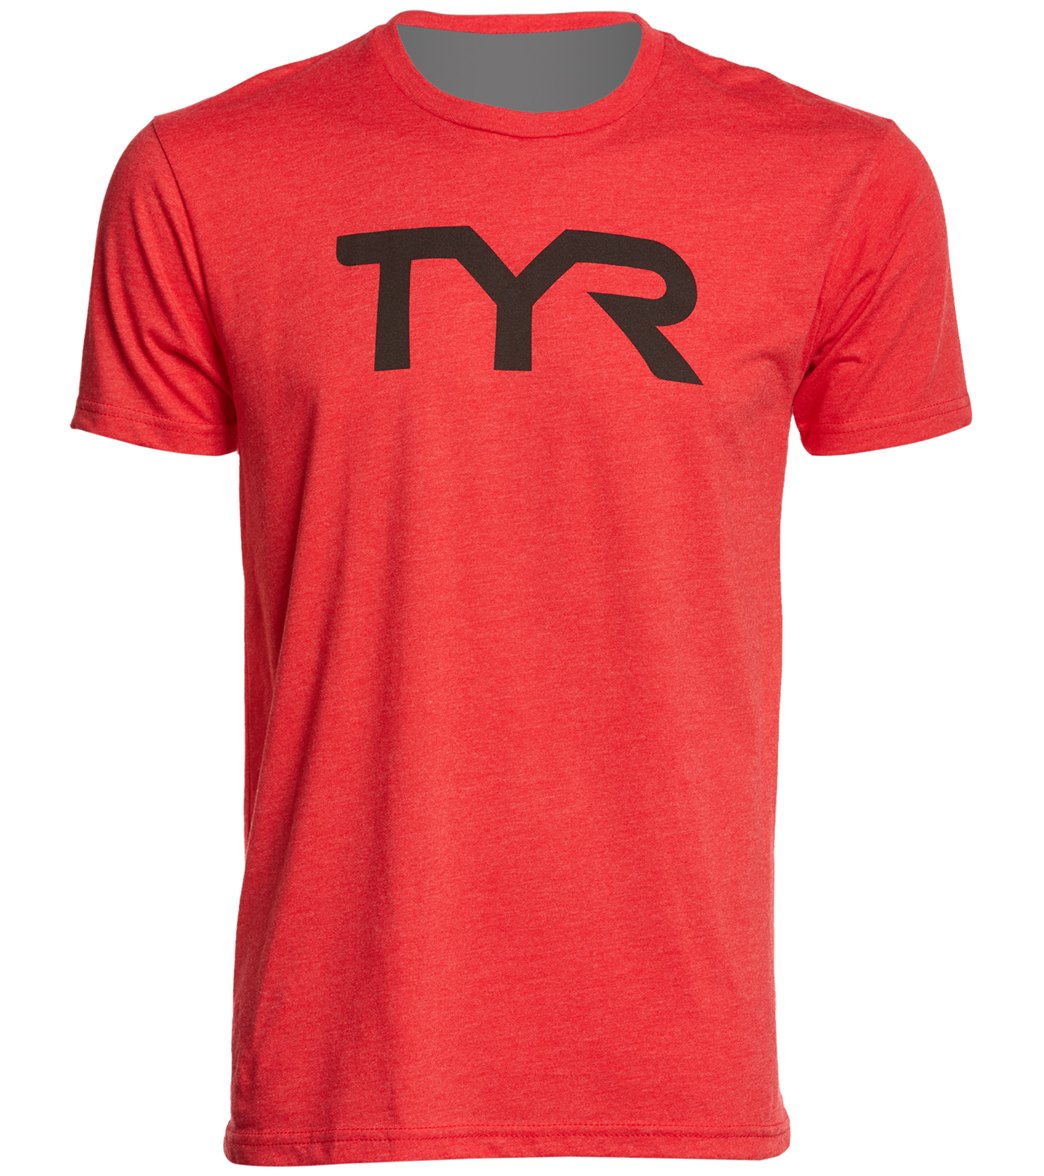 TYR Men's Team TYR Basic Graphic T Shirt at SwimOutlet.com